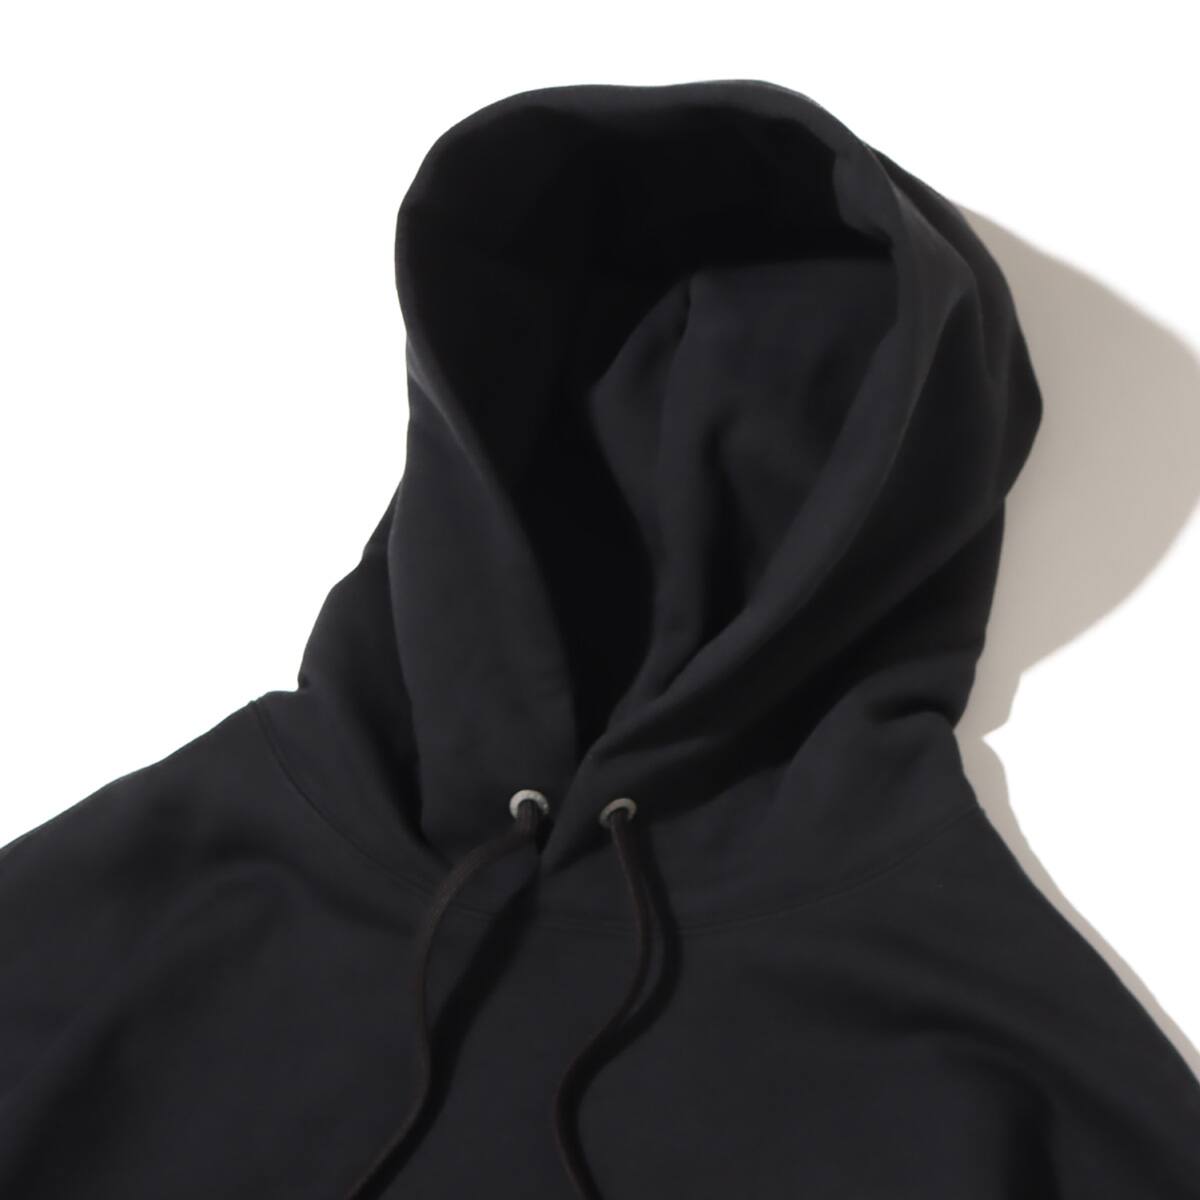 THE NORTH FACE NEVER STOP ING HOODIE BLACK 23FW-I